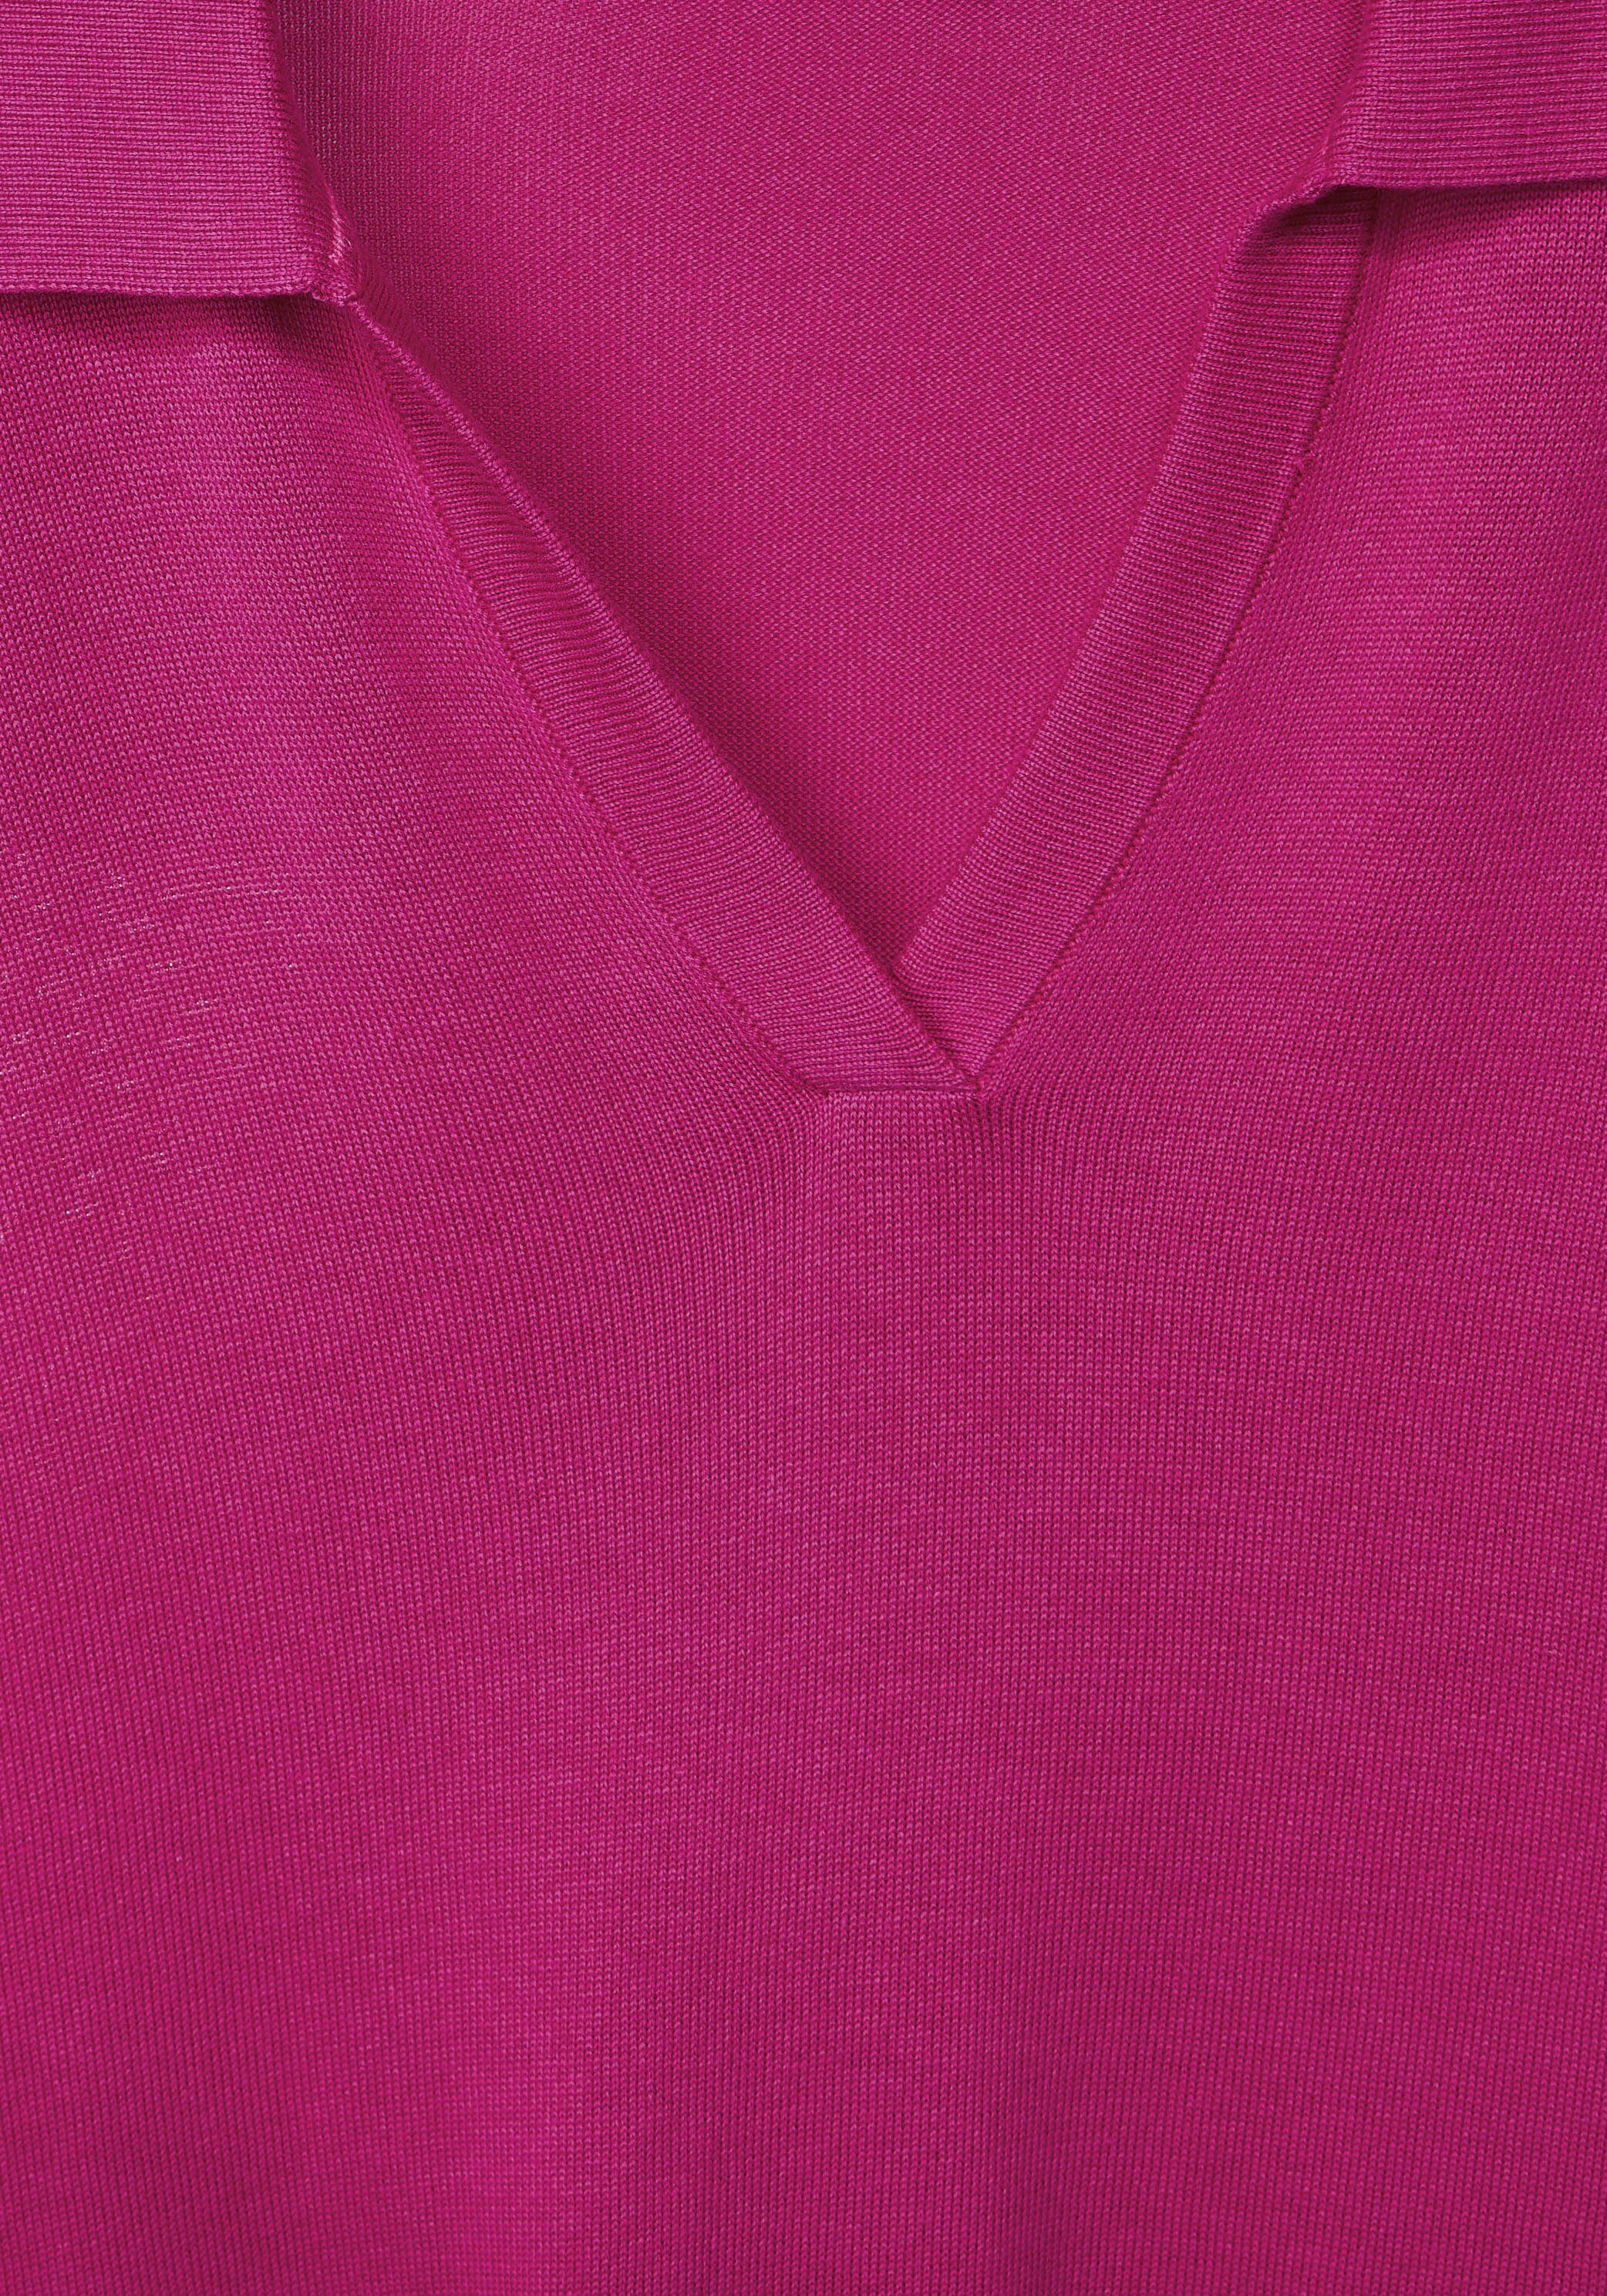 in pink Cecil cool Polokragenpullover Unifarbe